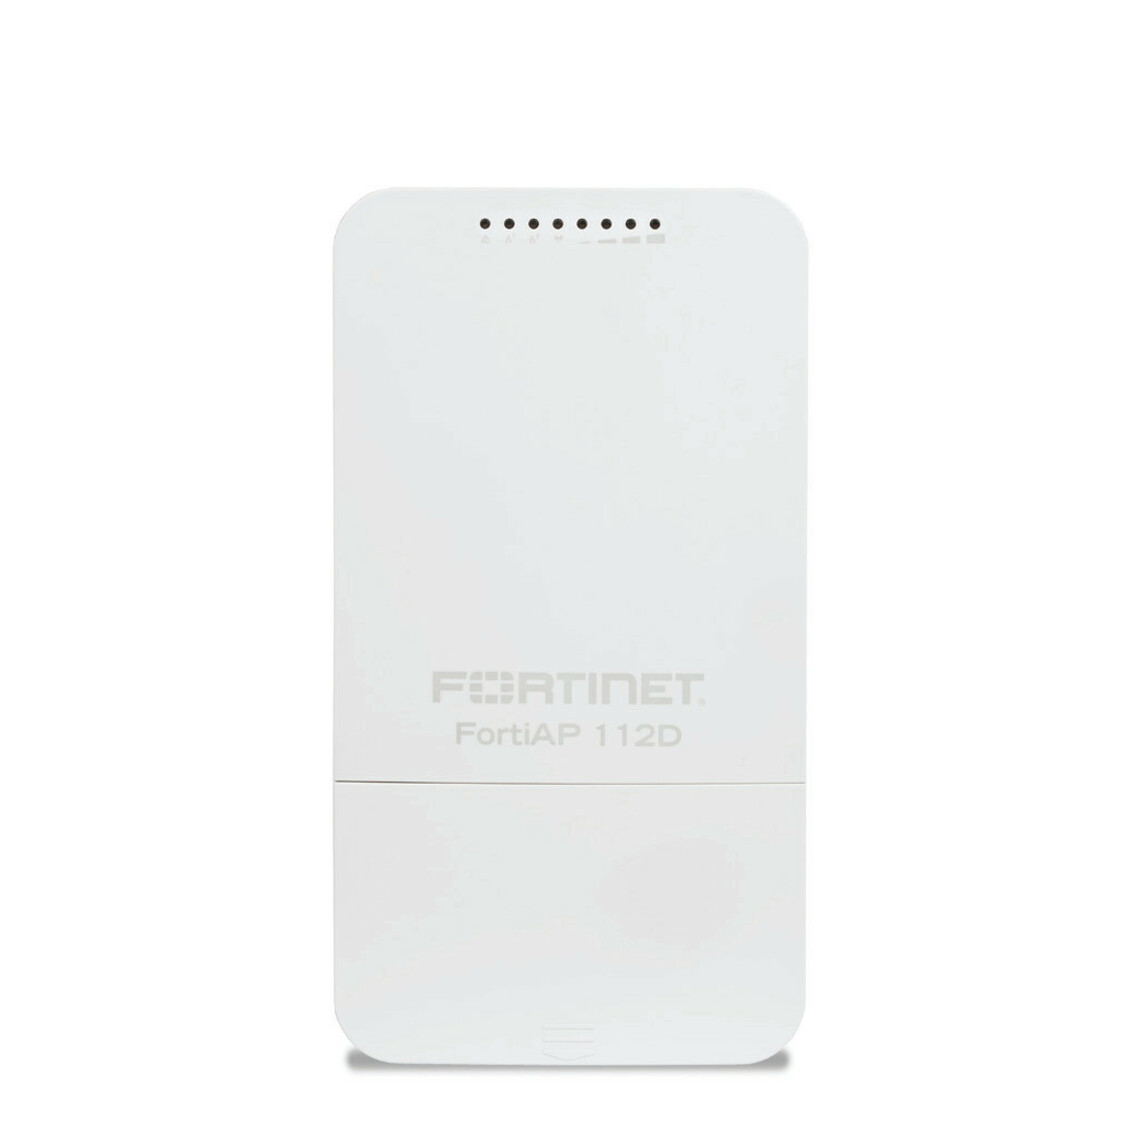 Fortinet FortiAP 112D IEEE 802.11n 150 Mbit/s Wireless Access Point2.48 GHz, 5 GHzMIMO Technology2 x Network (RJ-45)Ethernet, Fas… FAP-112D-A